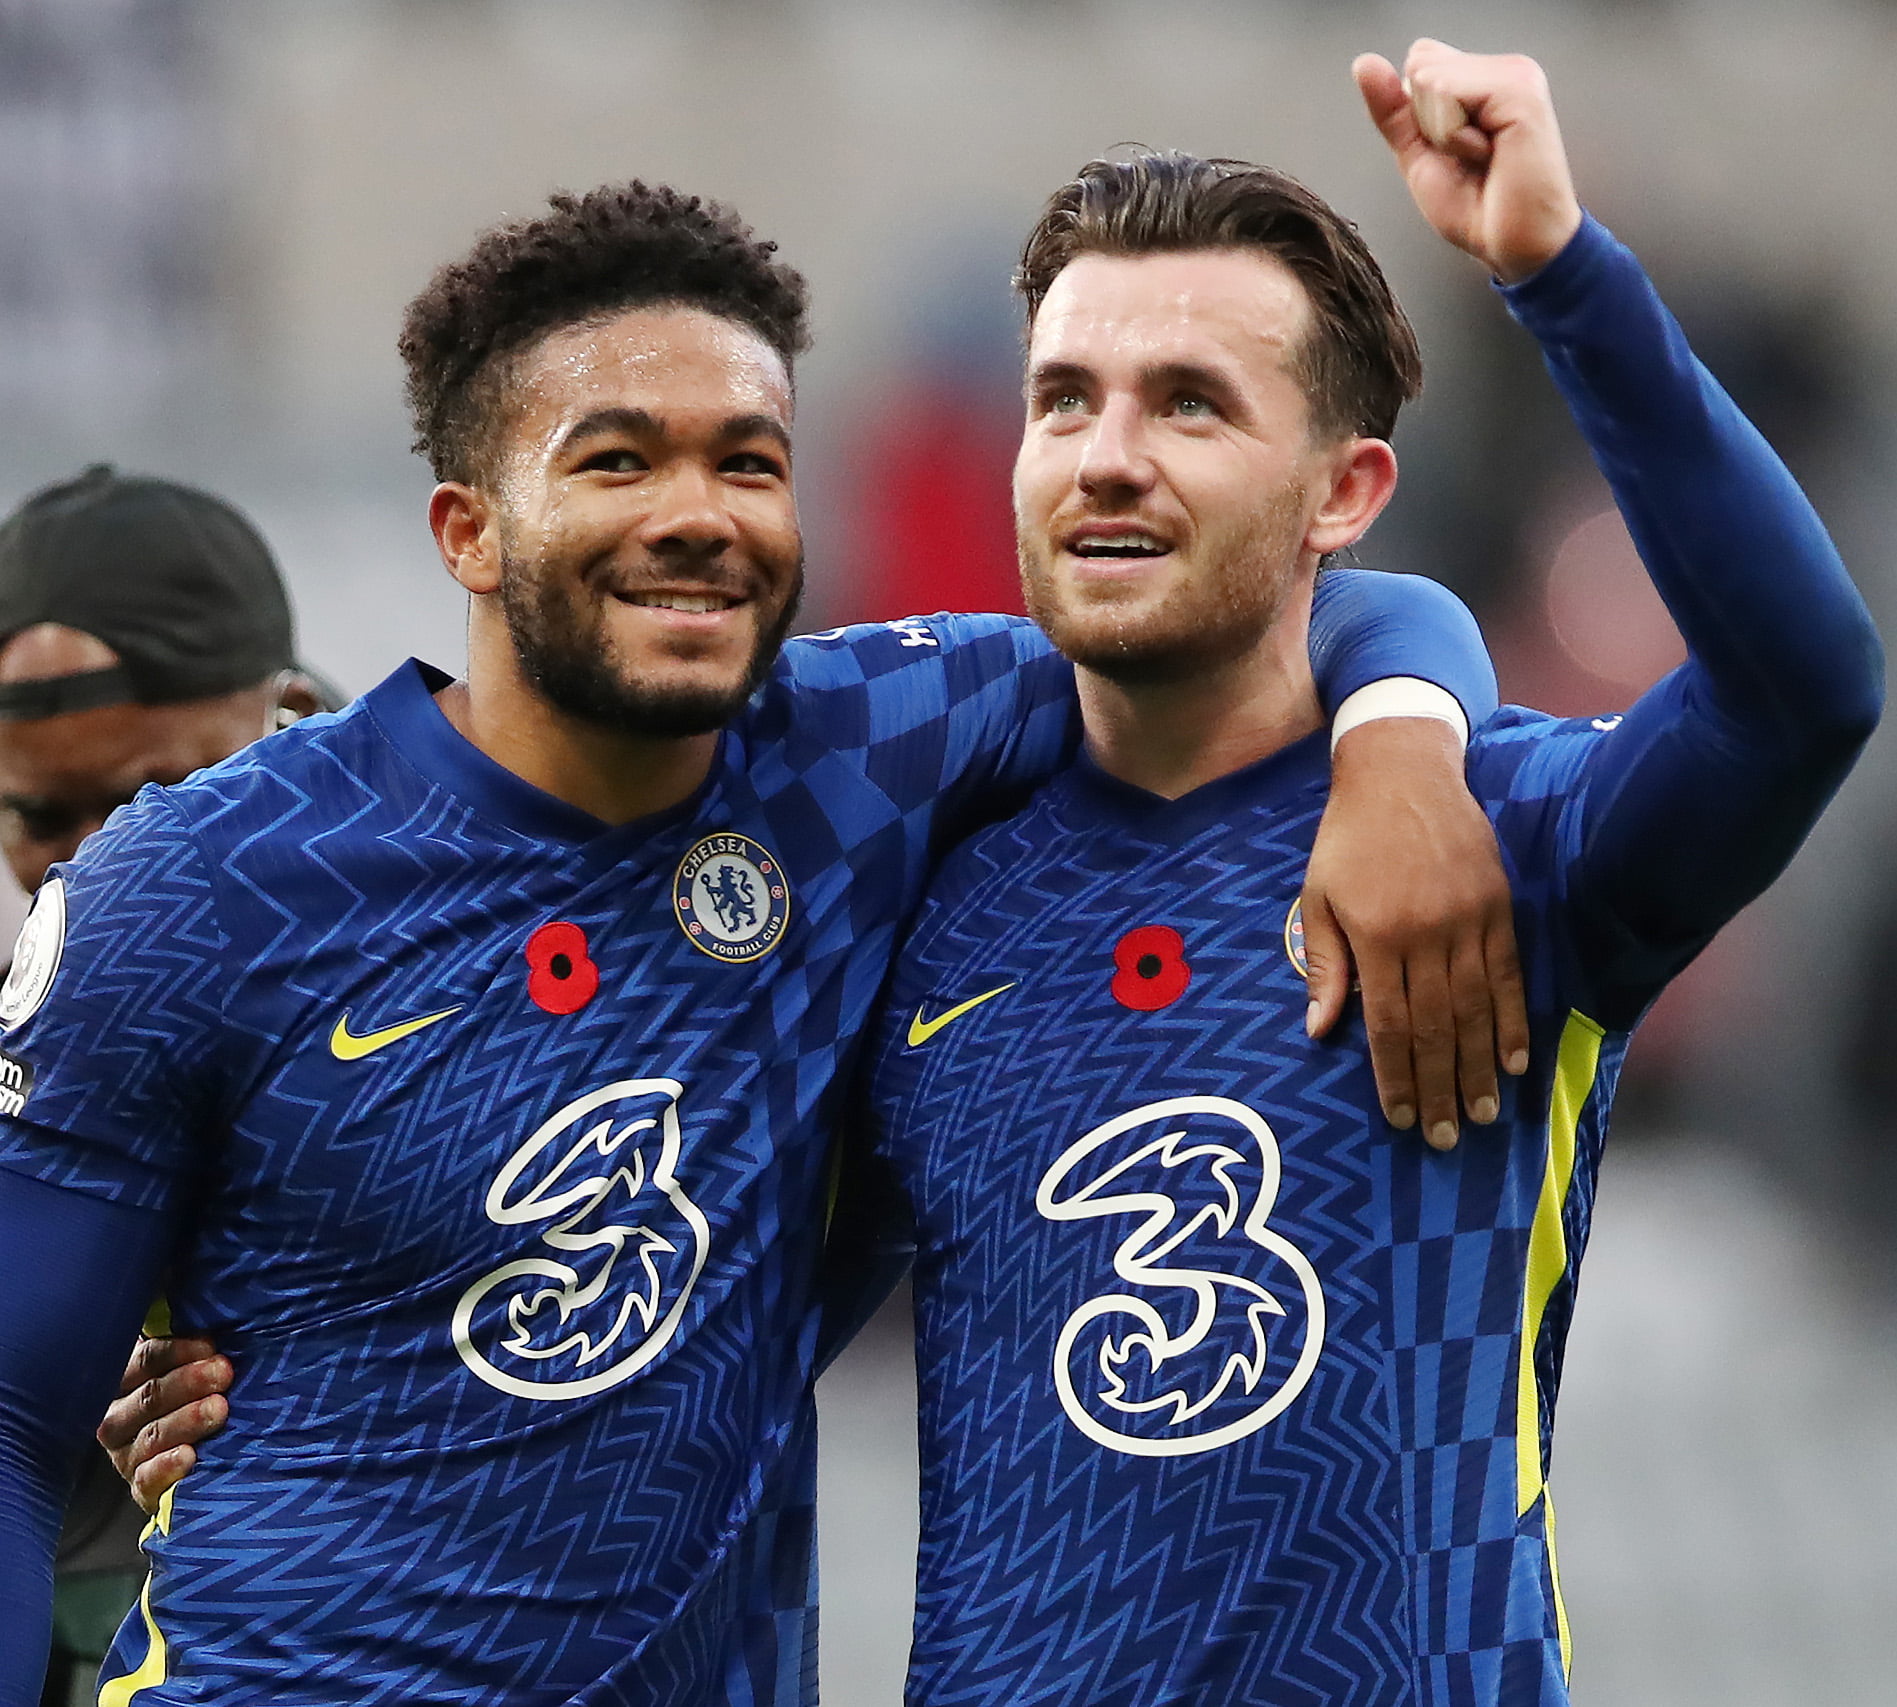 NEWCASTLE UPON TYNE, ENGLAND - OCTOBER 30: Reece James of Chelsea celebrates with team mate Ben Chilwell during the Premier League match between Newcastle United and Chelsea at St. James Park on October 30, 2021 in Newcastle upon Tyne, England. (Photo by Ian MacNicol/Getty Images)